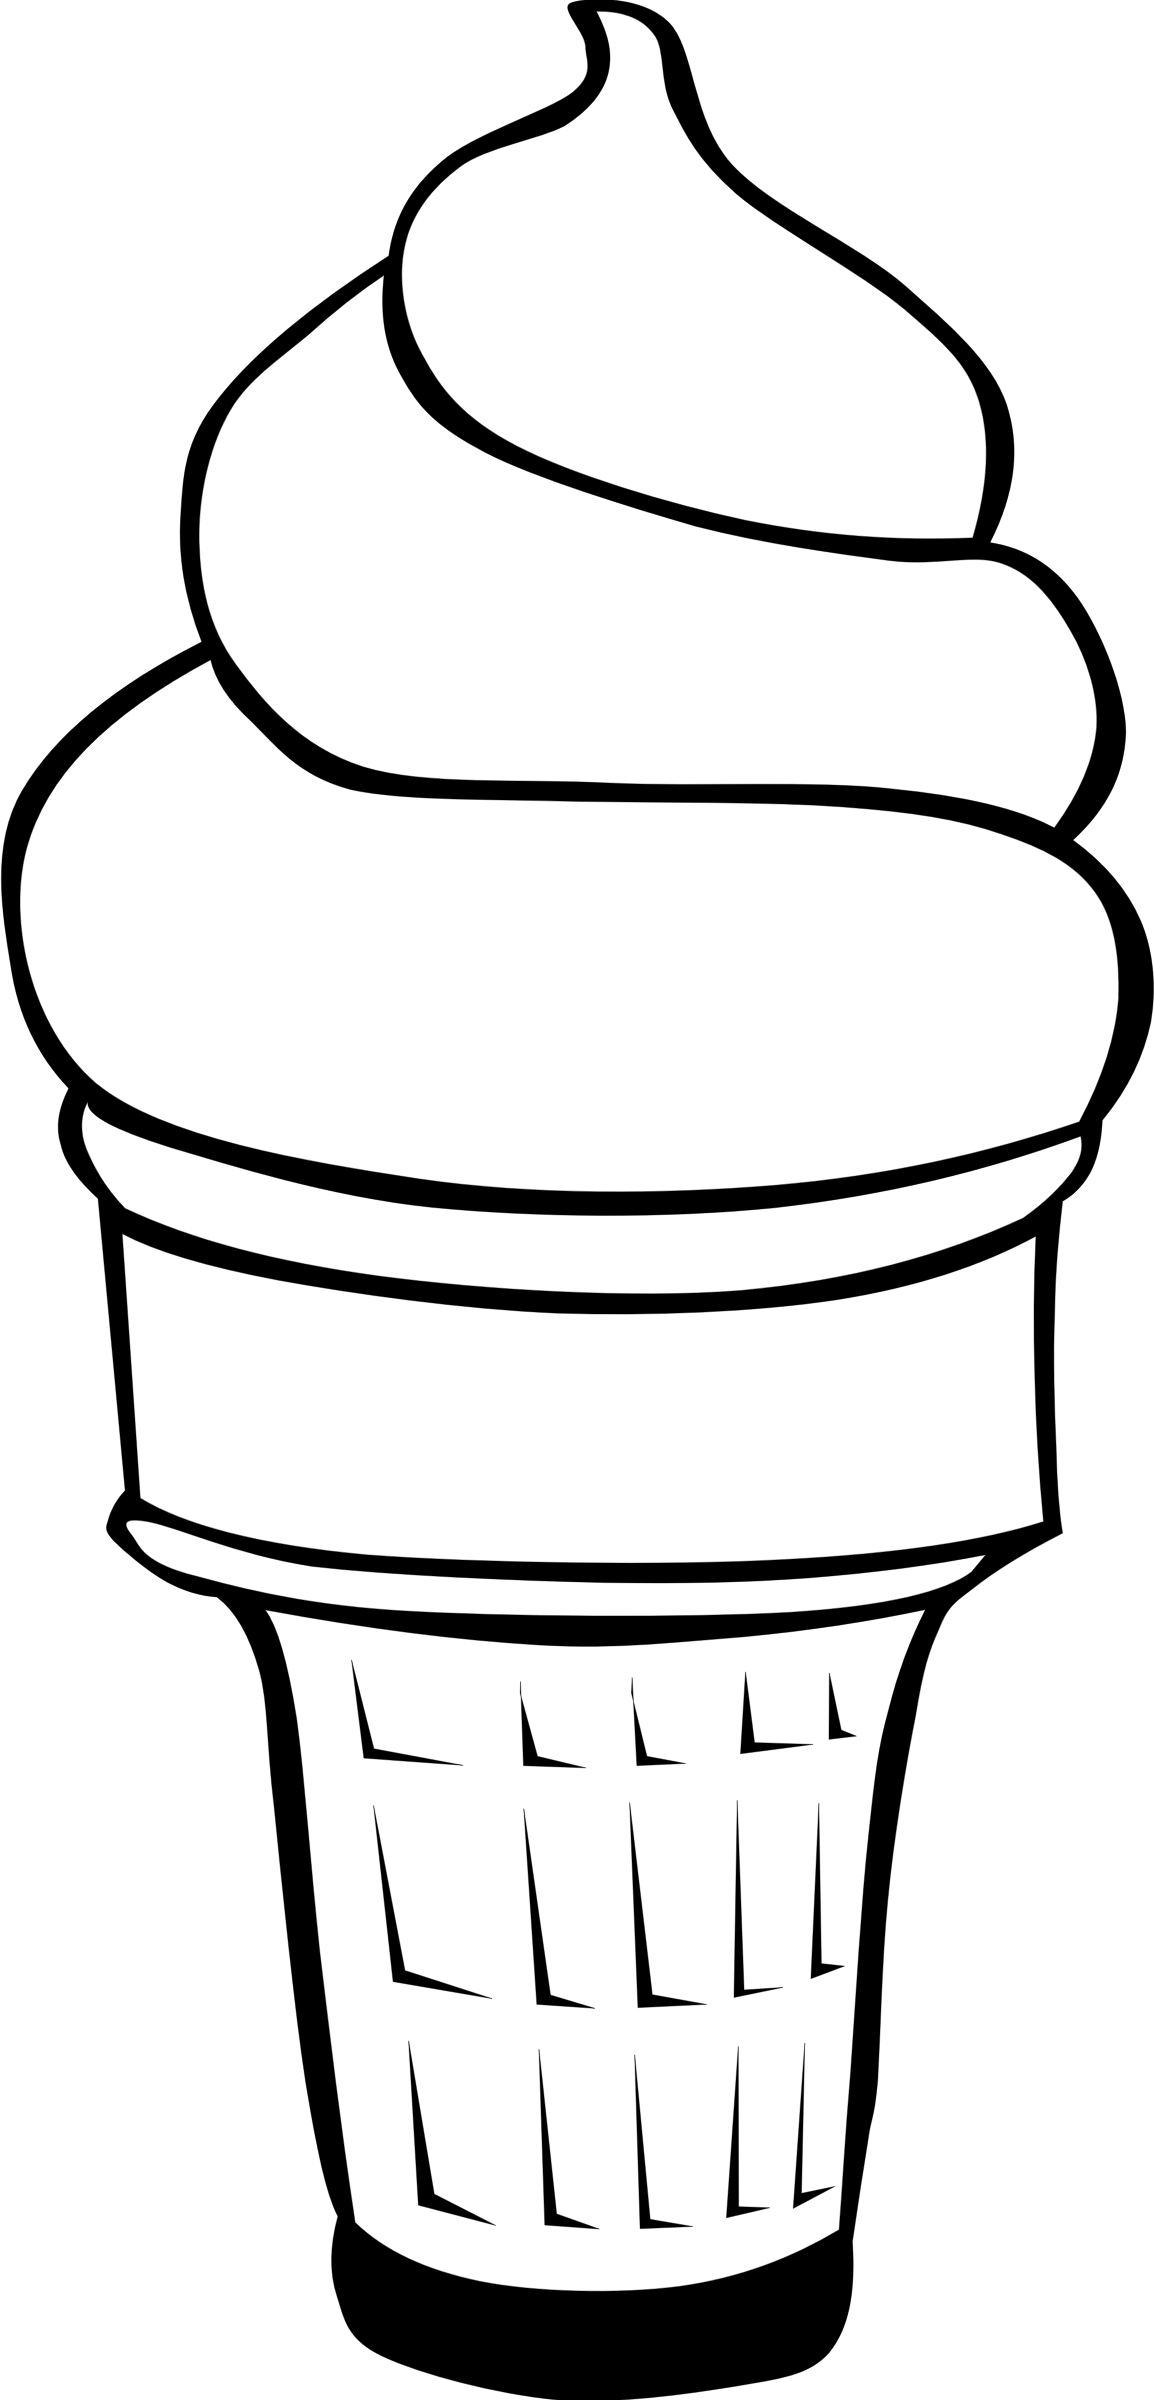 Email clipart white object. Ice cream cone line